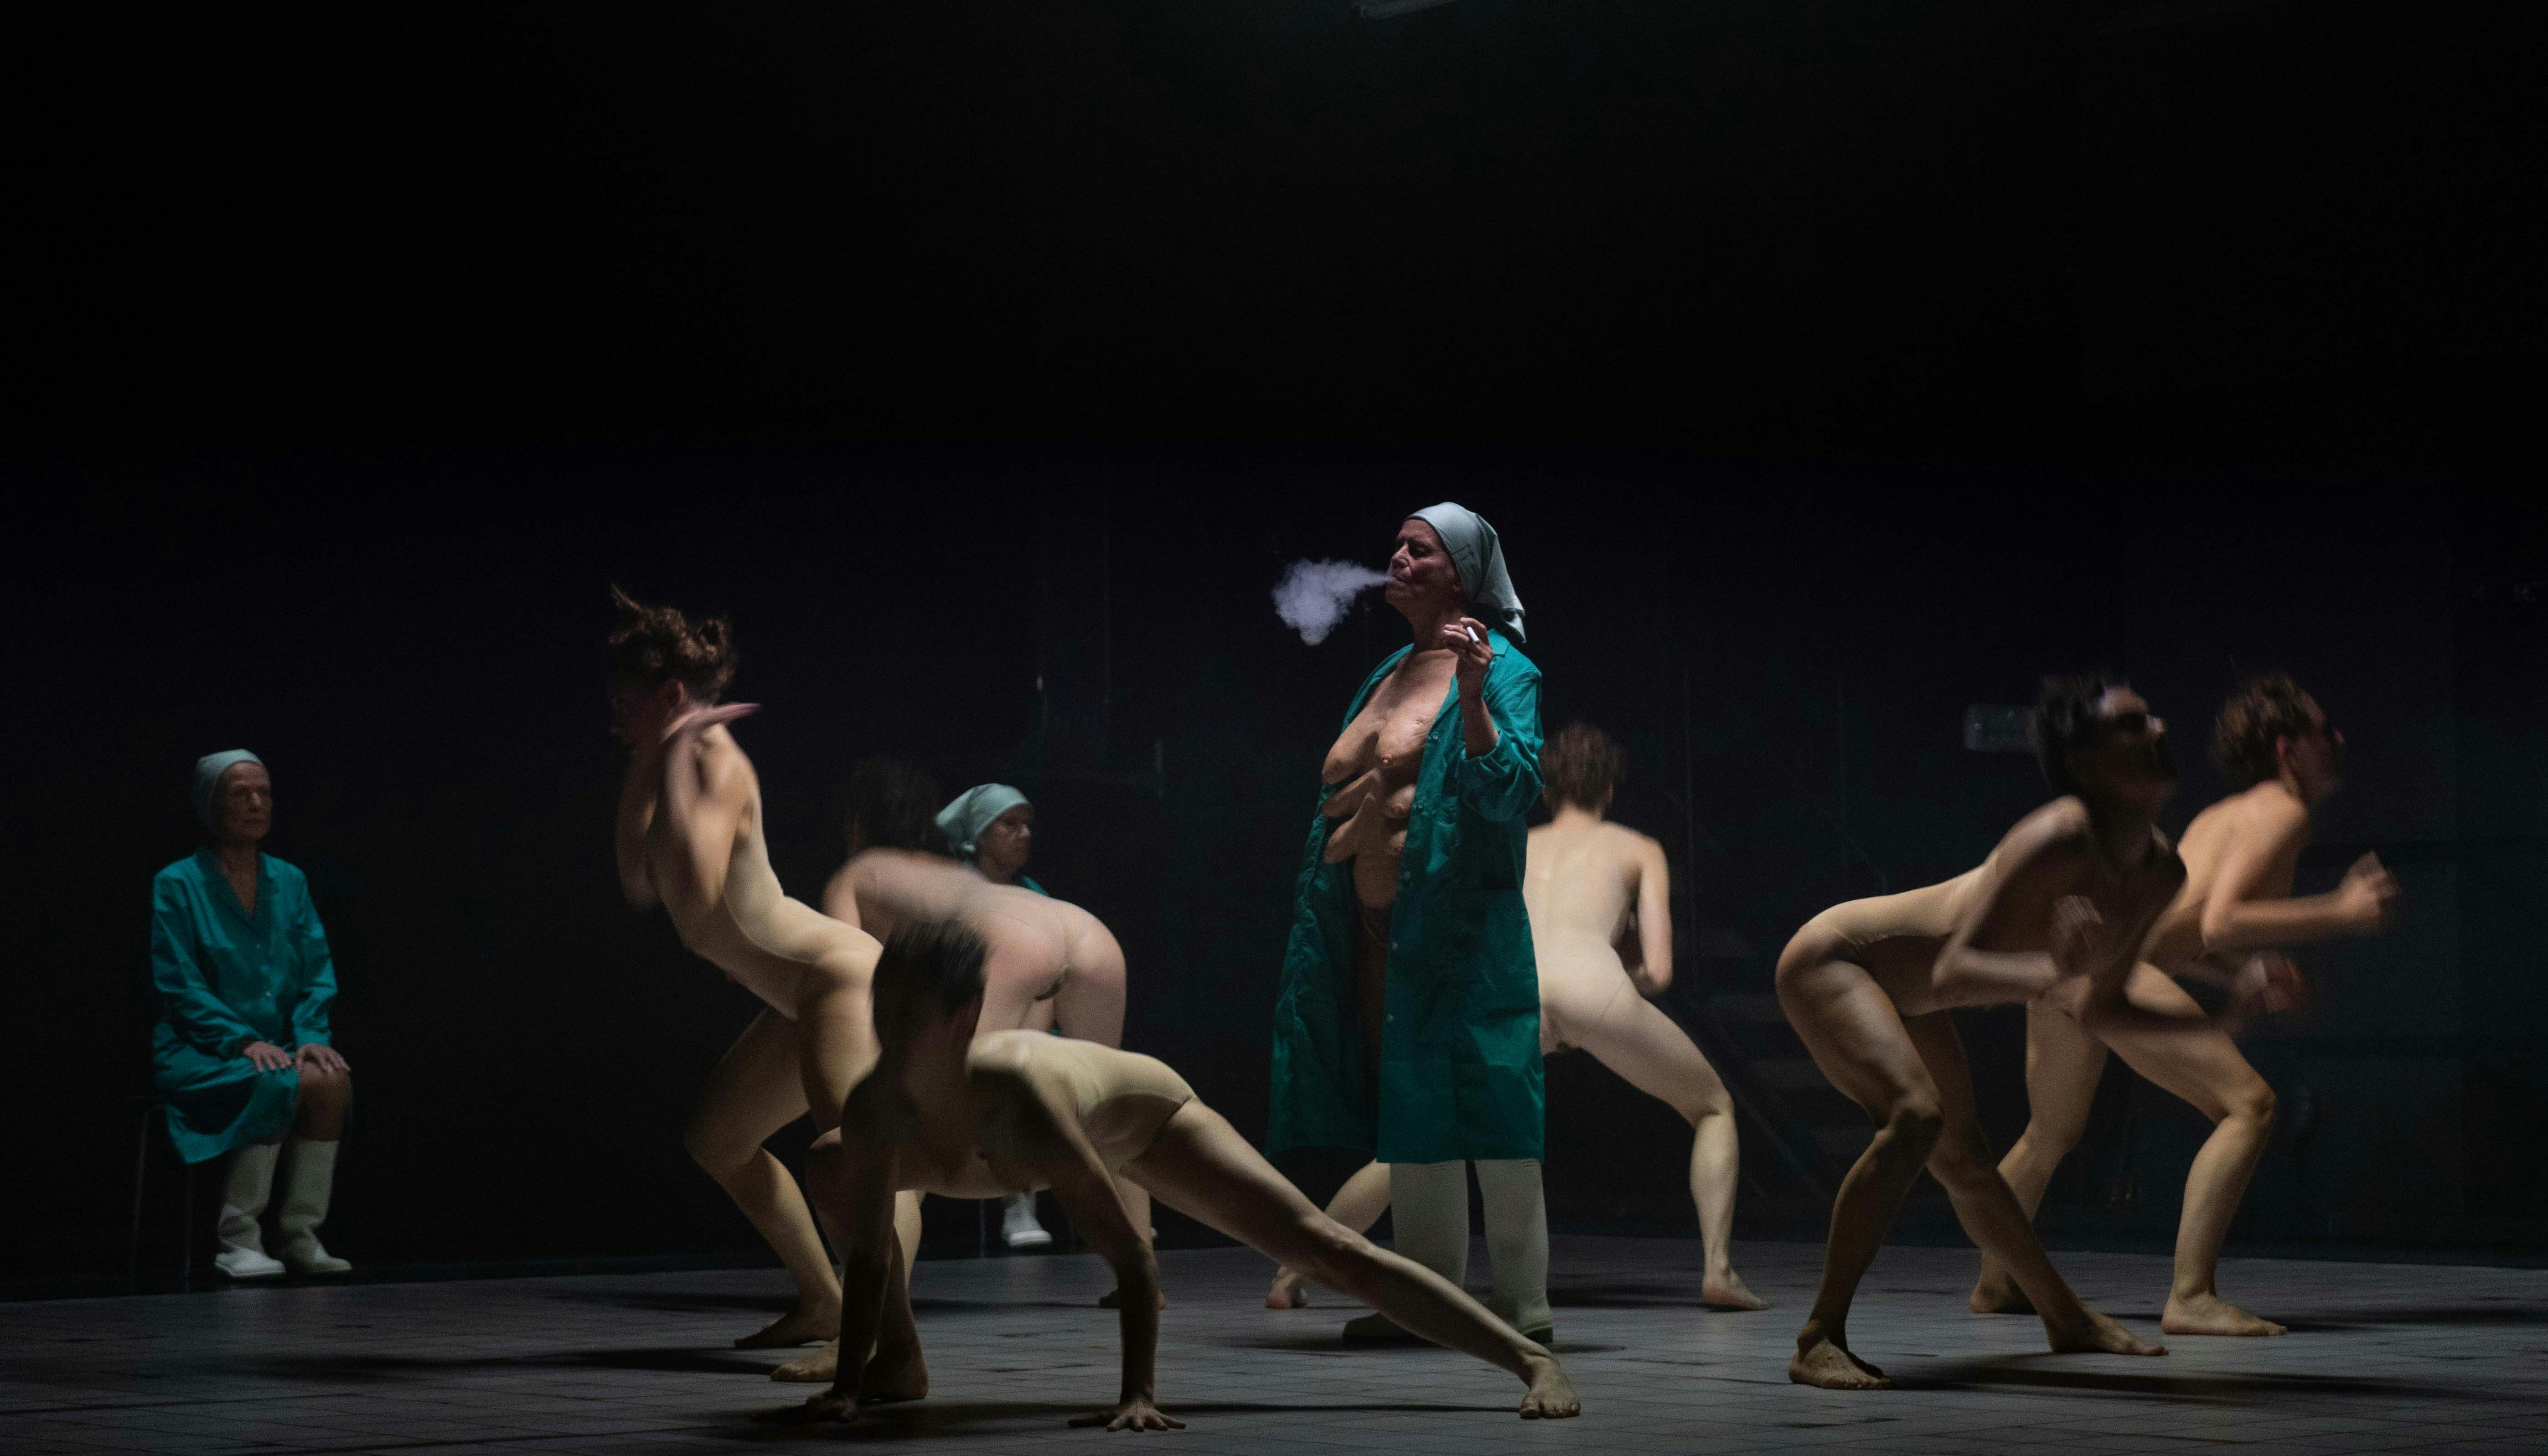 Some naked human bodies dance in a circle, facing outward. In the center is an elderly woman in a lab coat, smoking a cigarette. Under the gown she is naked; multiple pairs of breasts are visible on her chest.